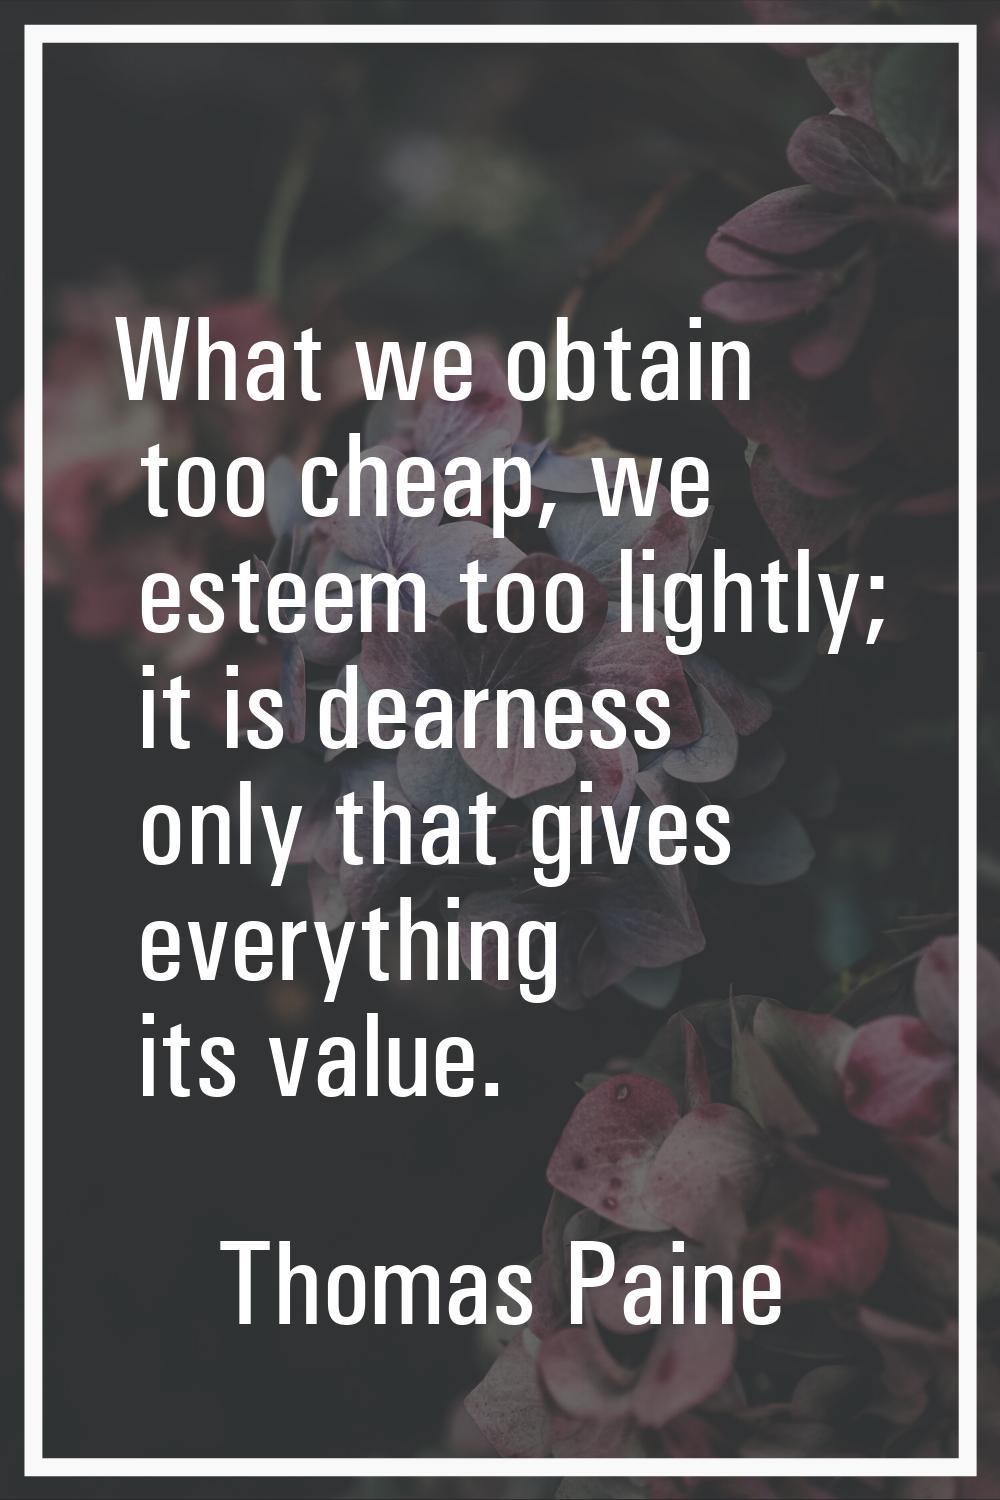 What we obtain too cheap, we esteem too lightly; it is dearness only that gives everything its valu